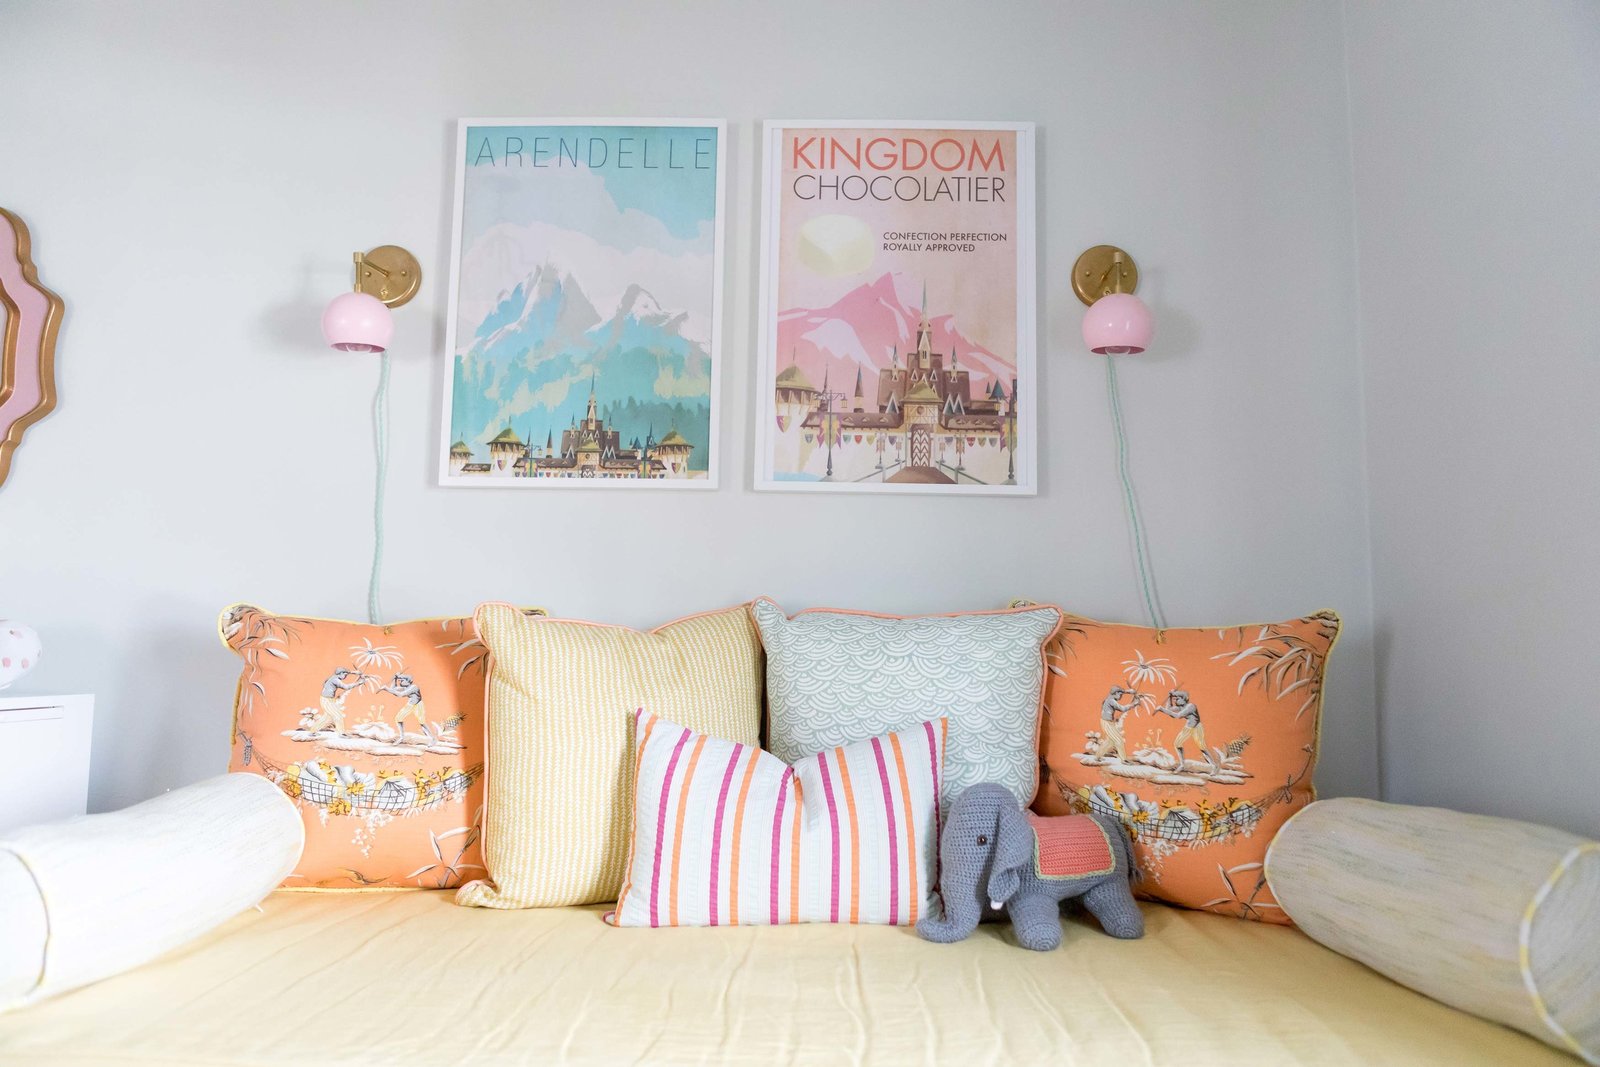 A day bed with colorful throw pillows and two framed posters.